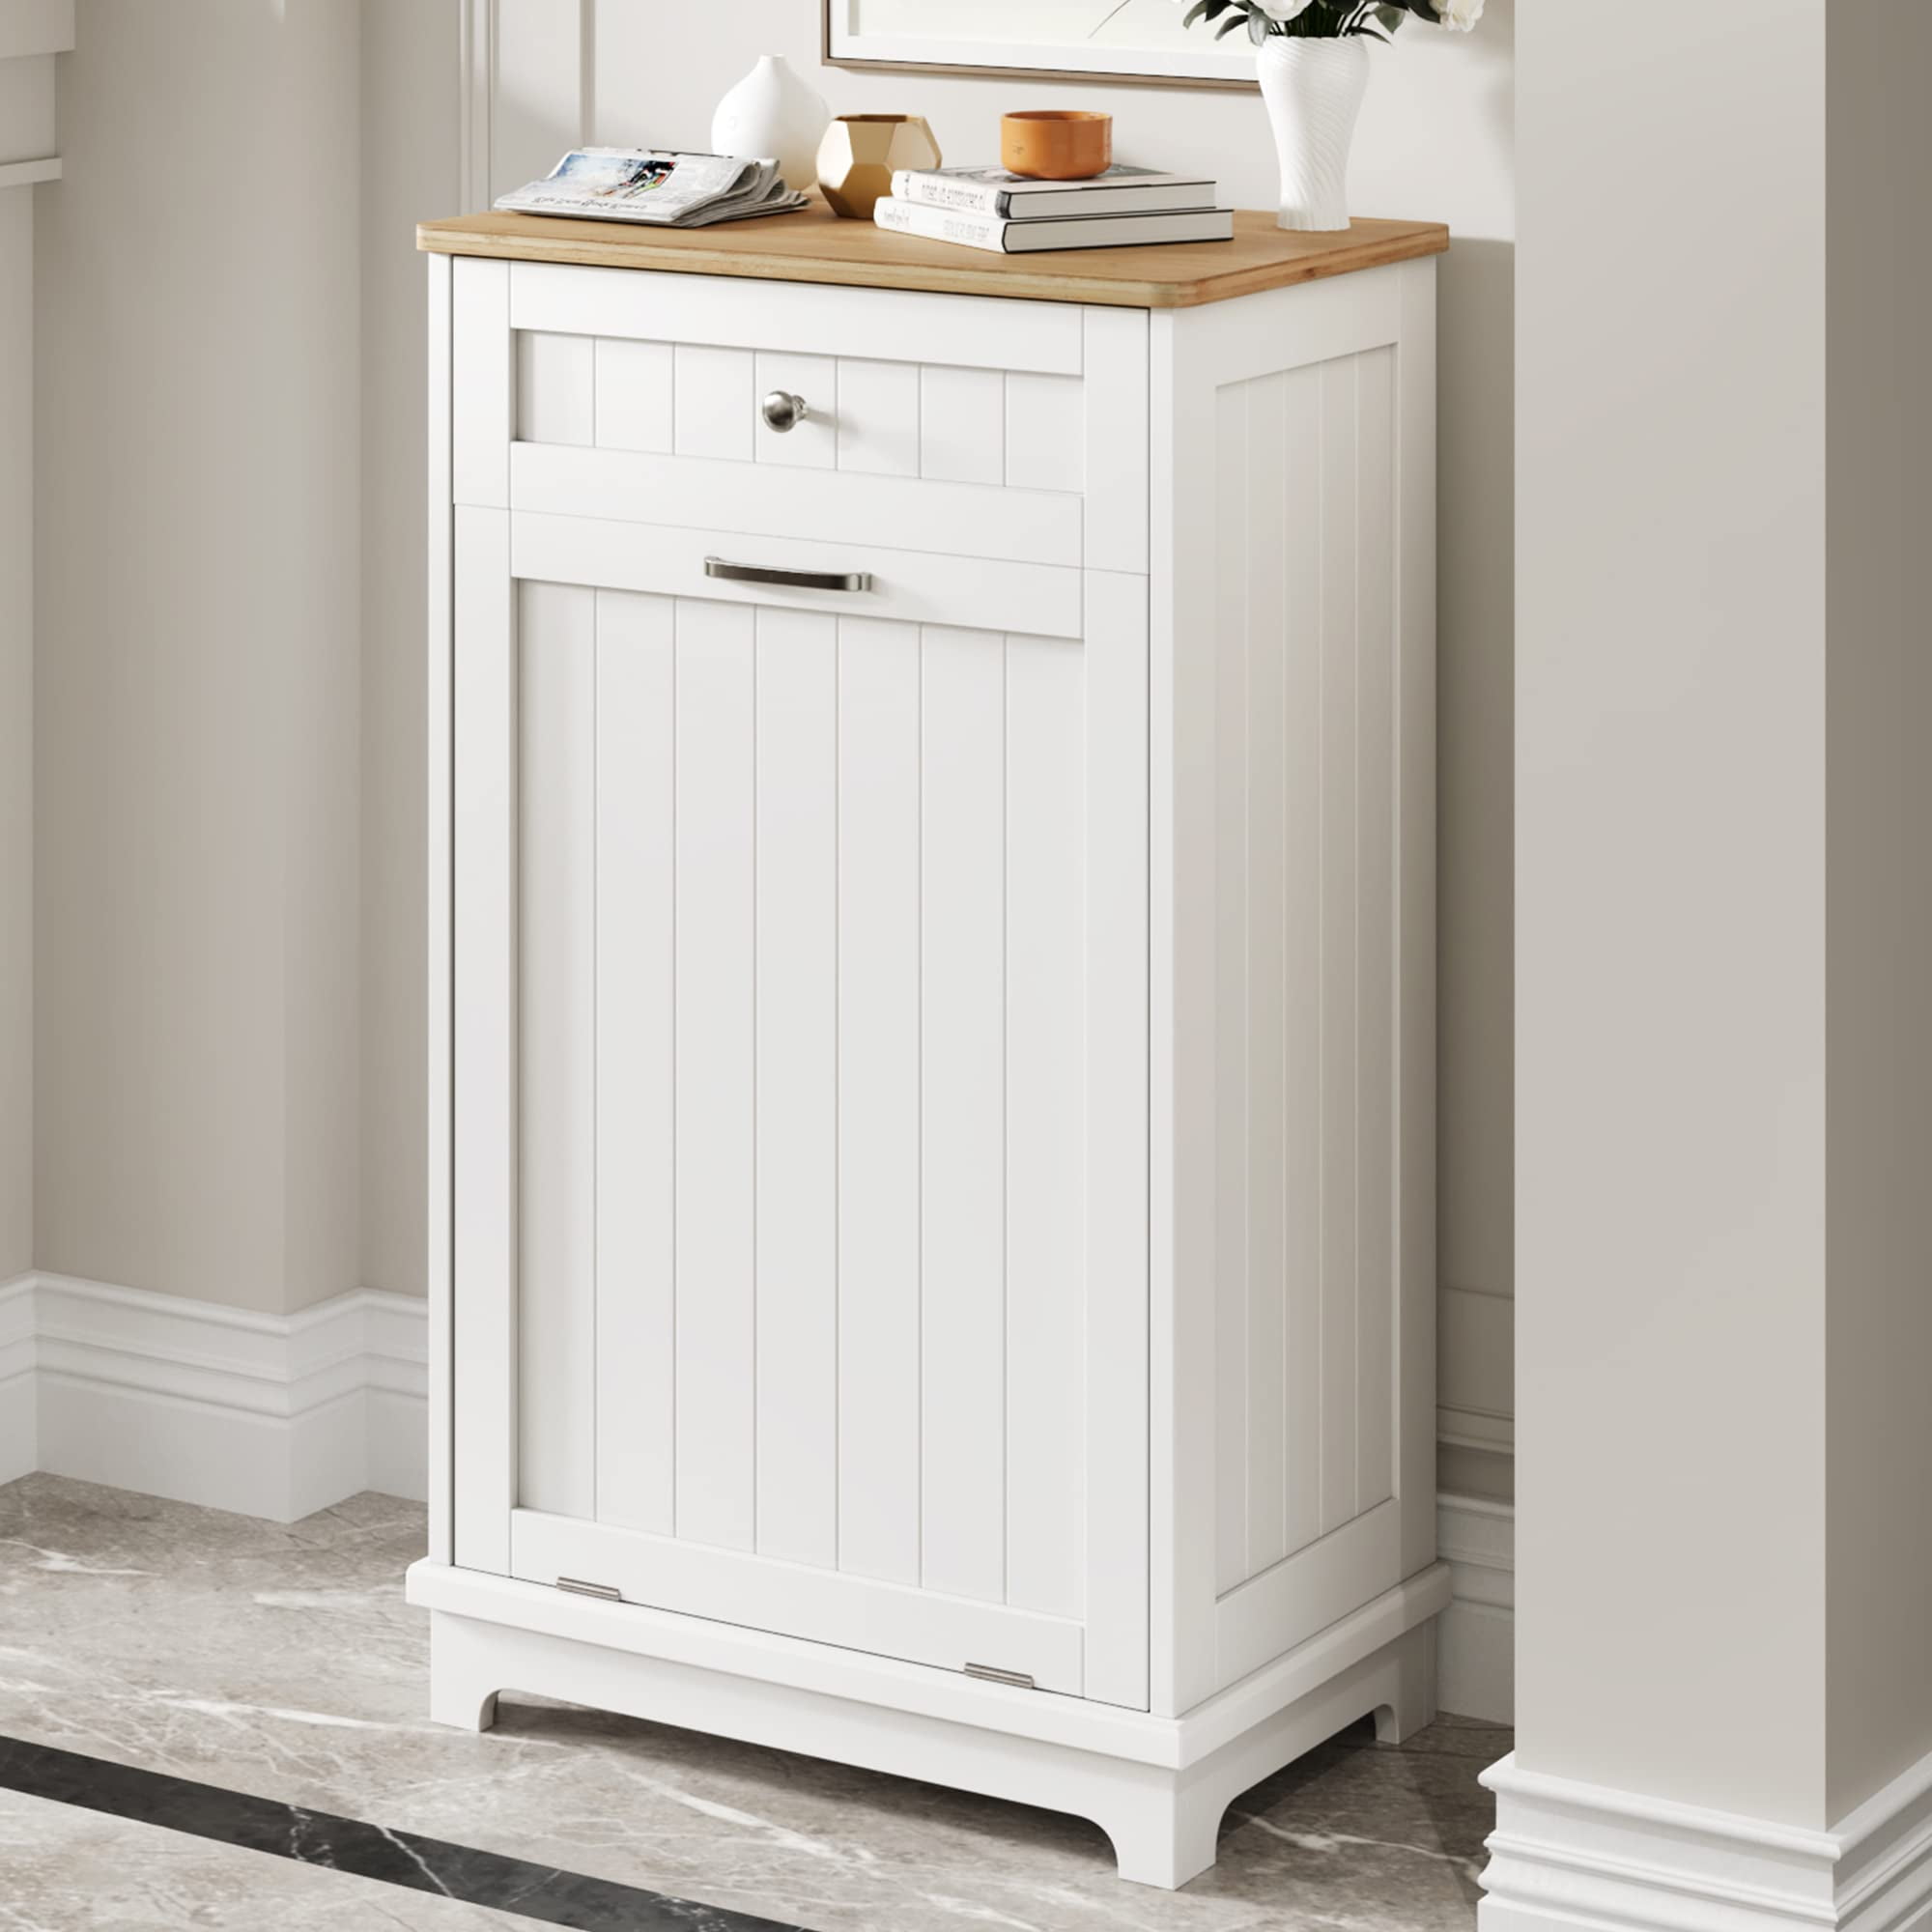 VINGLI White Farmhouse Wood Tilt Out Trash Cabinet with Drawer and